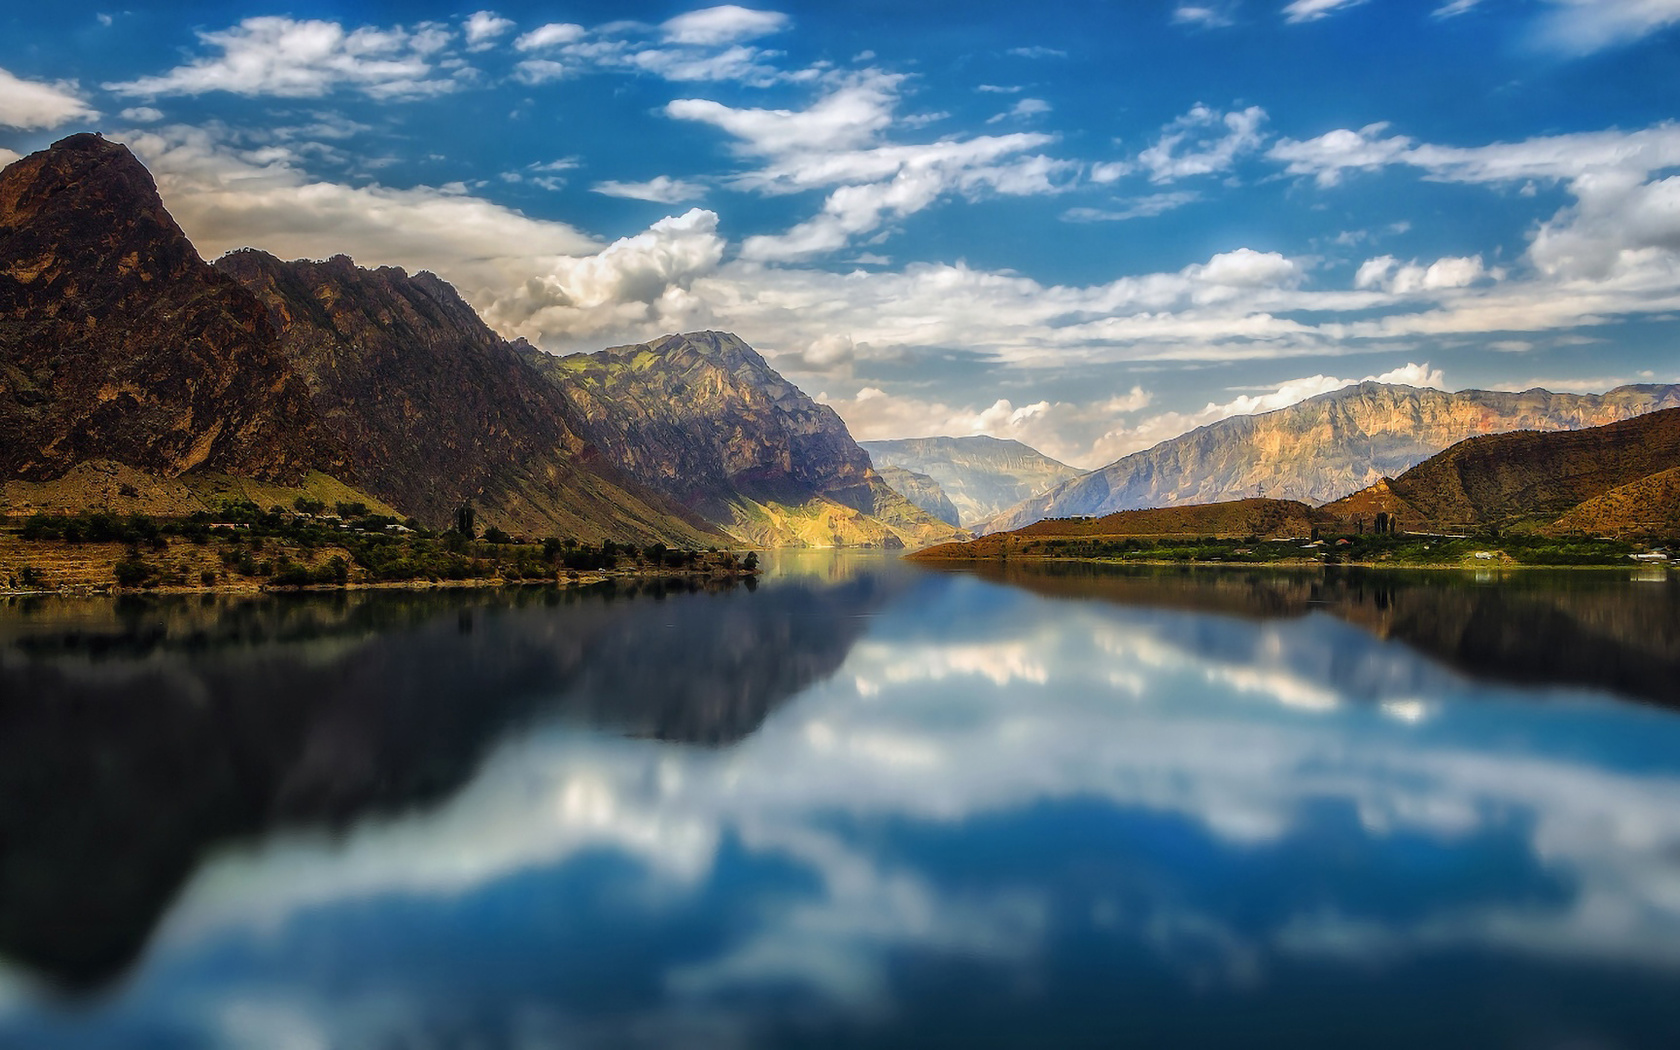 nature, lake, river, landscape, mountains, clouds, sky, trees, reflection